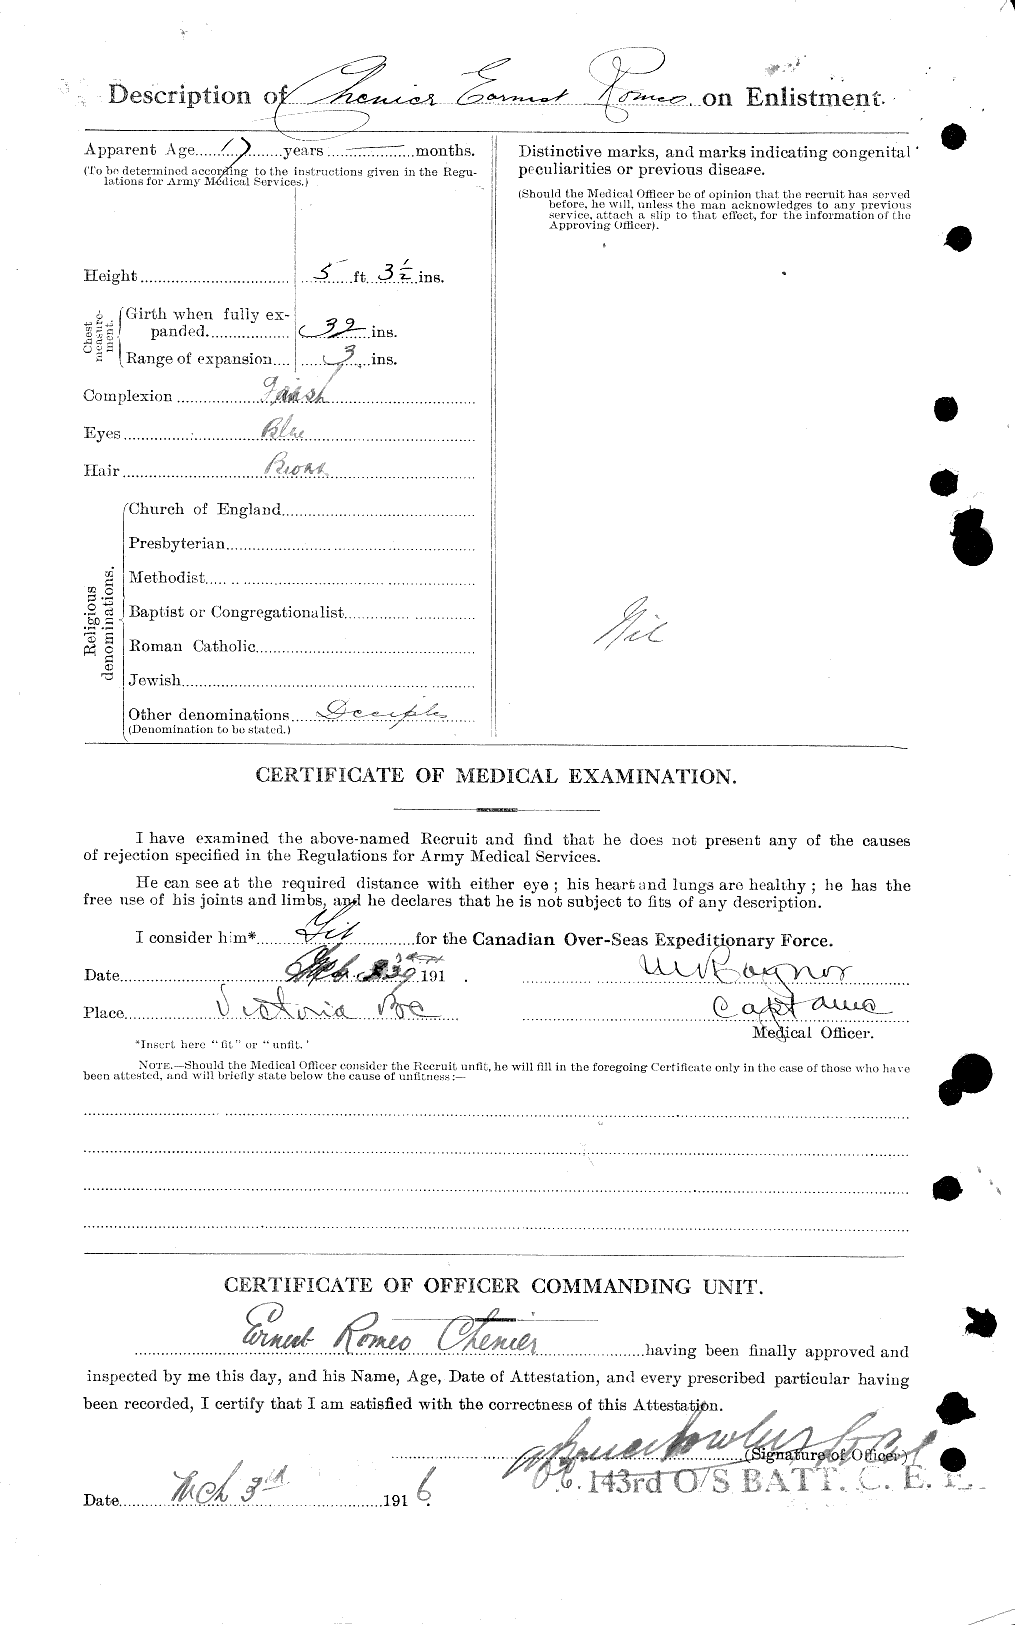 Personnel Records of the First World War - CEF 017404b